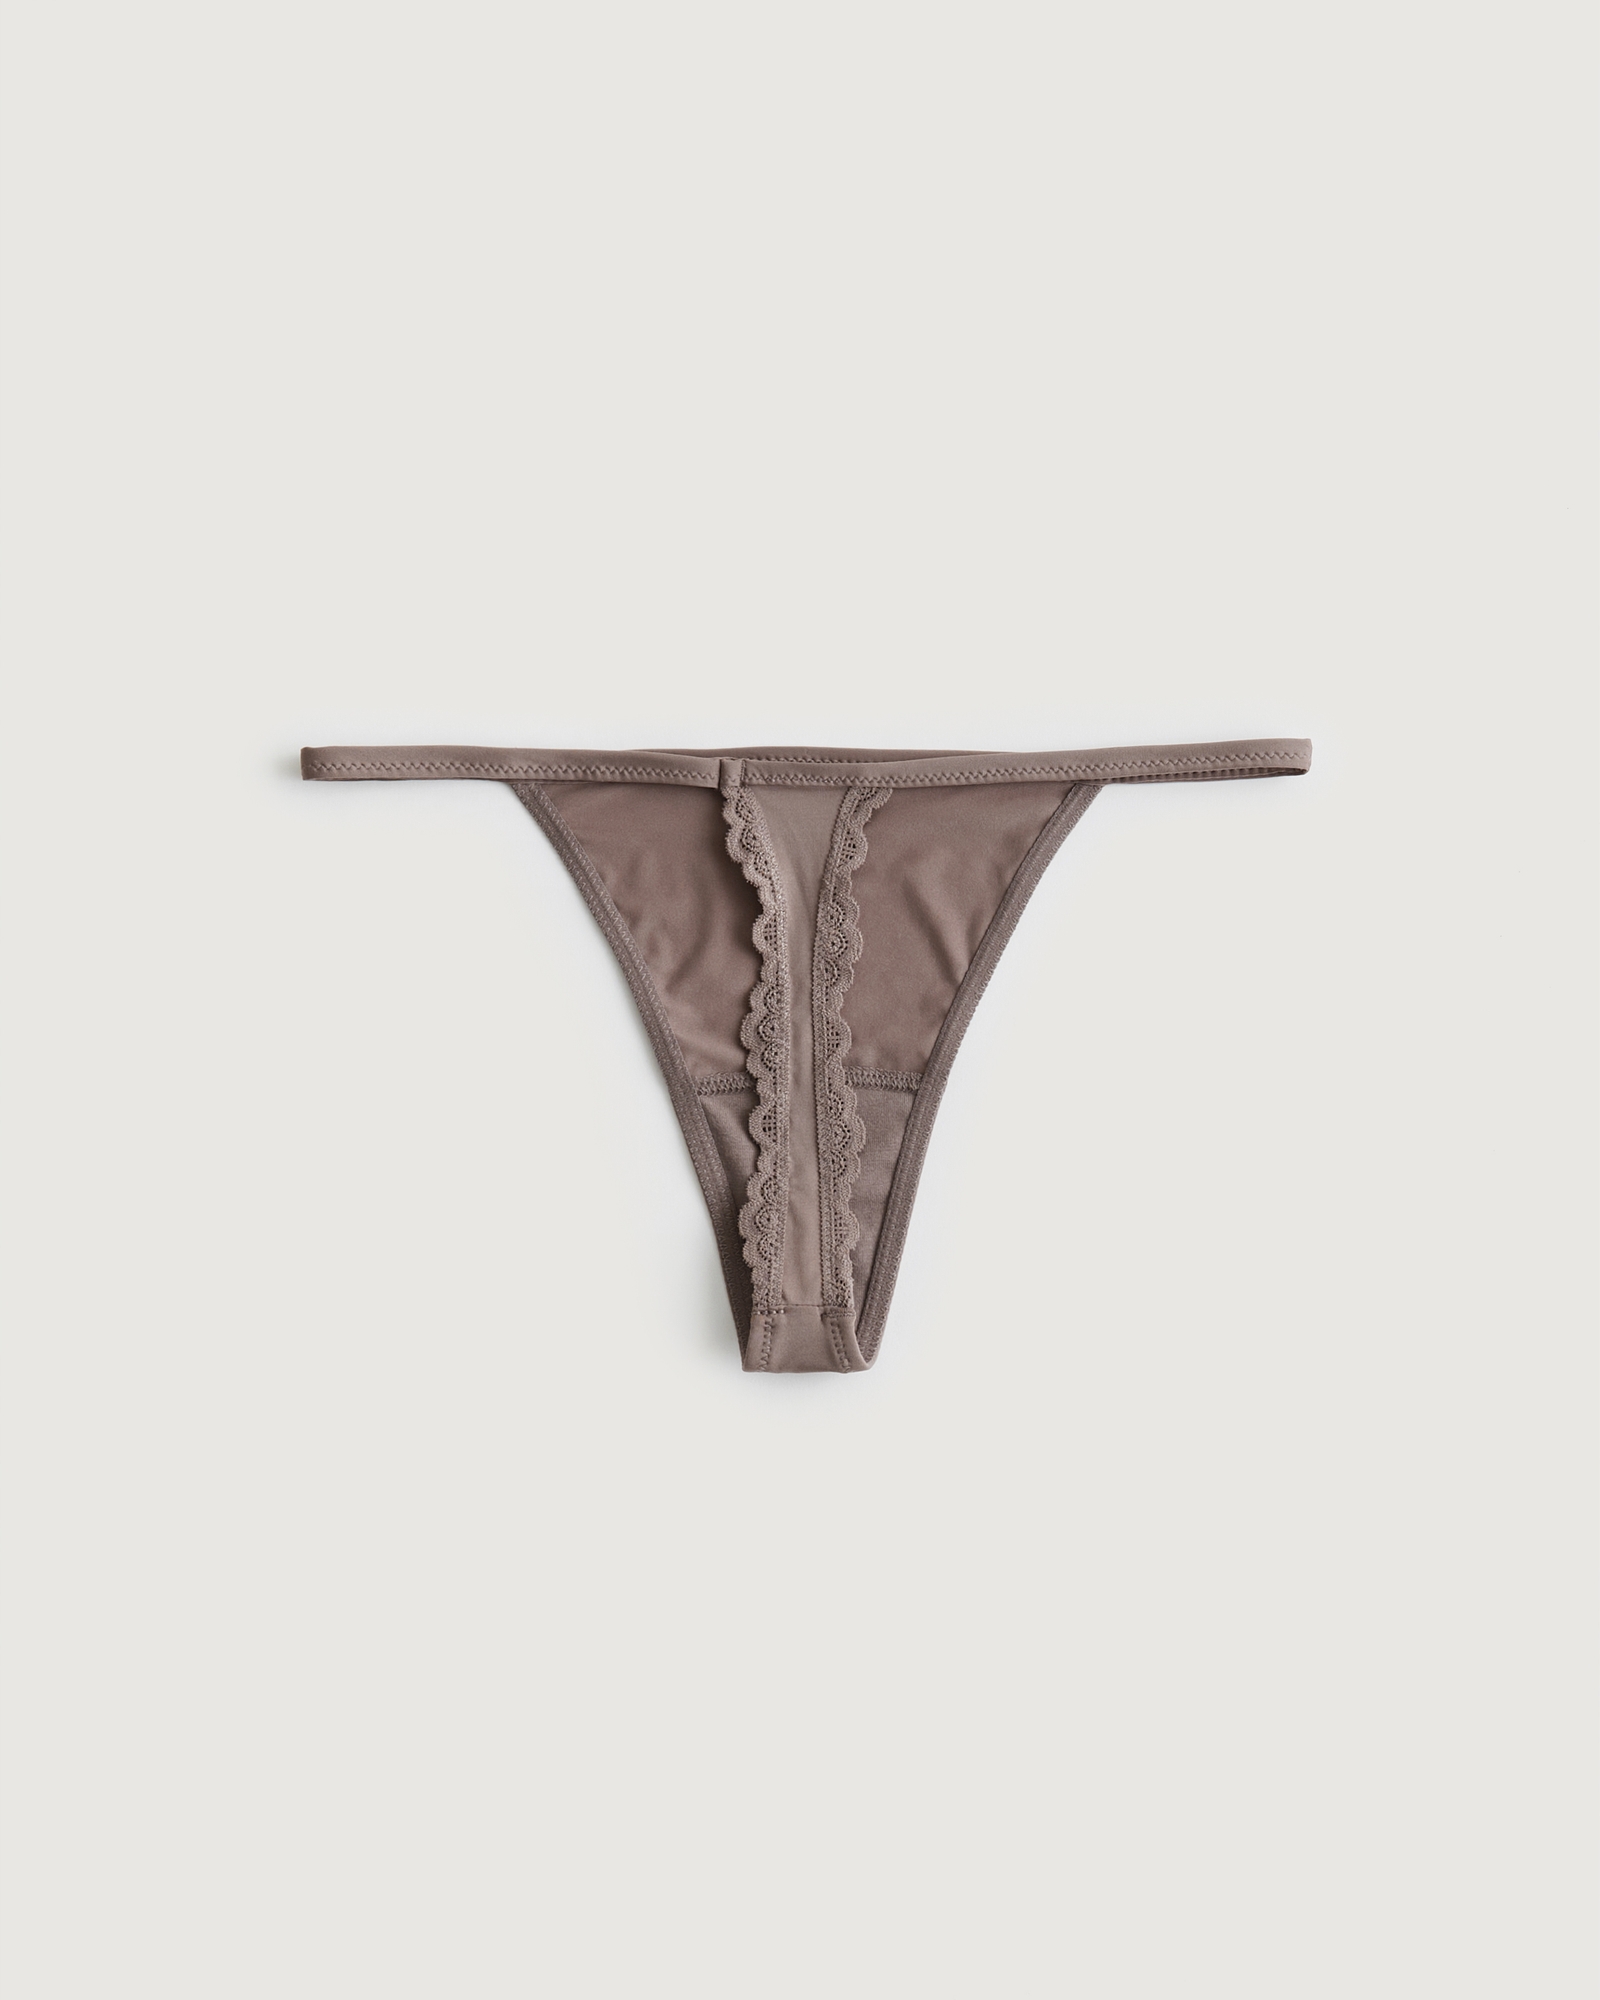 Hollister Gilly Hicks Micro Thong Underwear 3-Pack